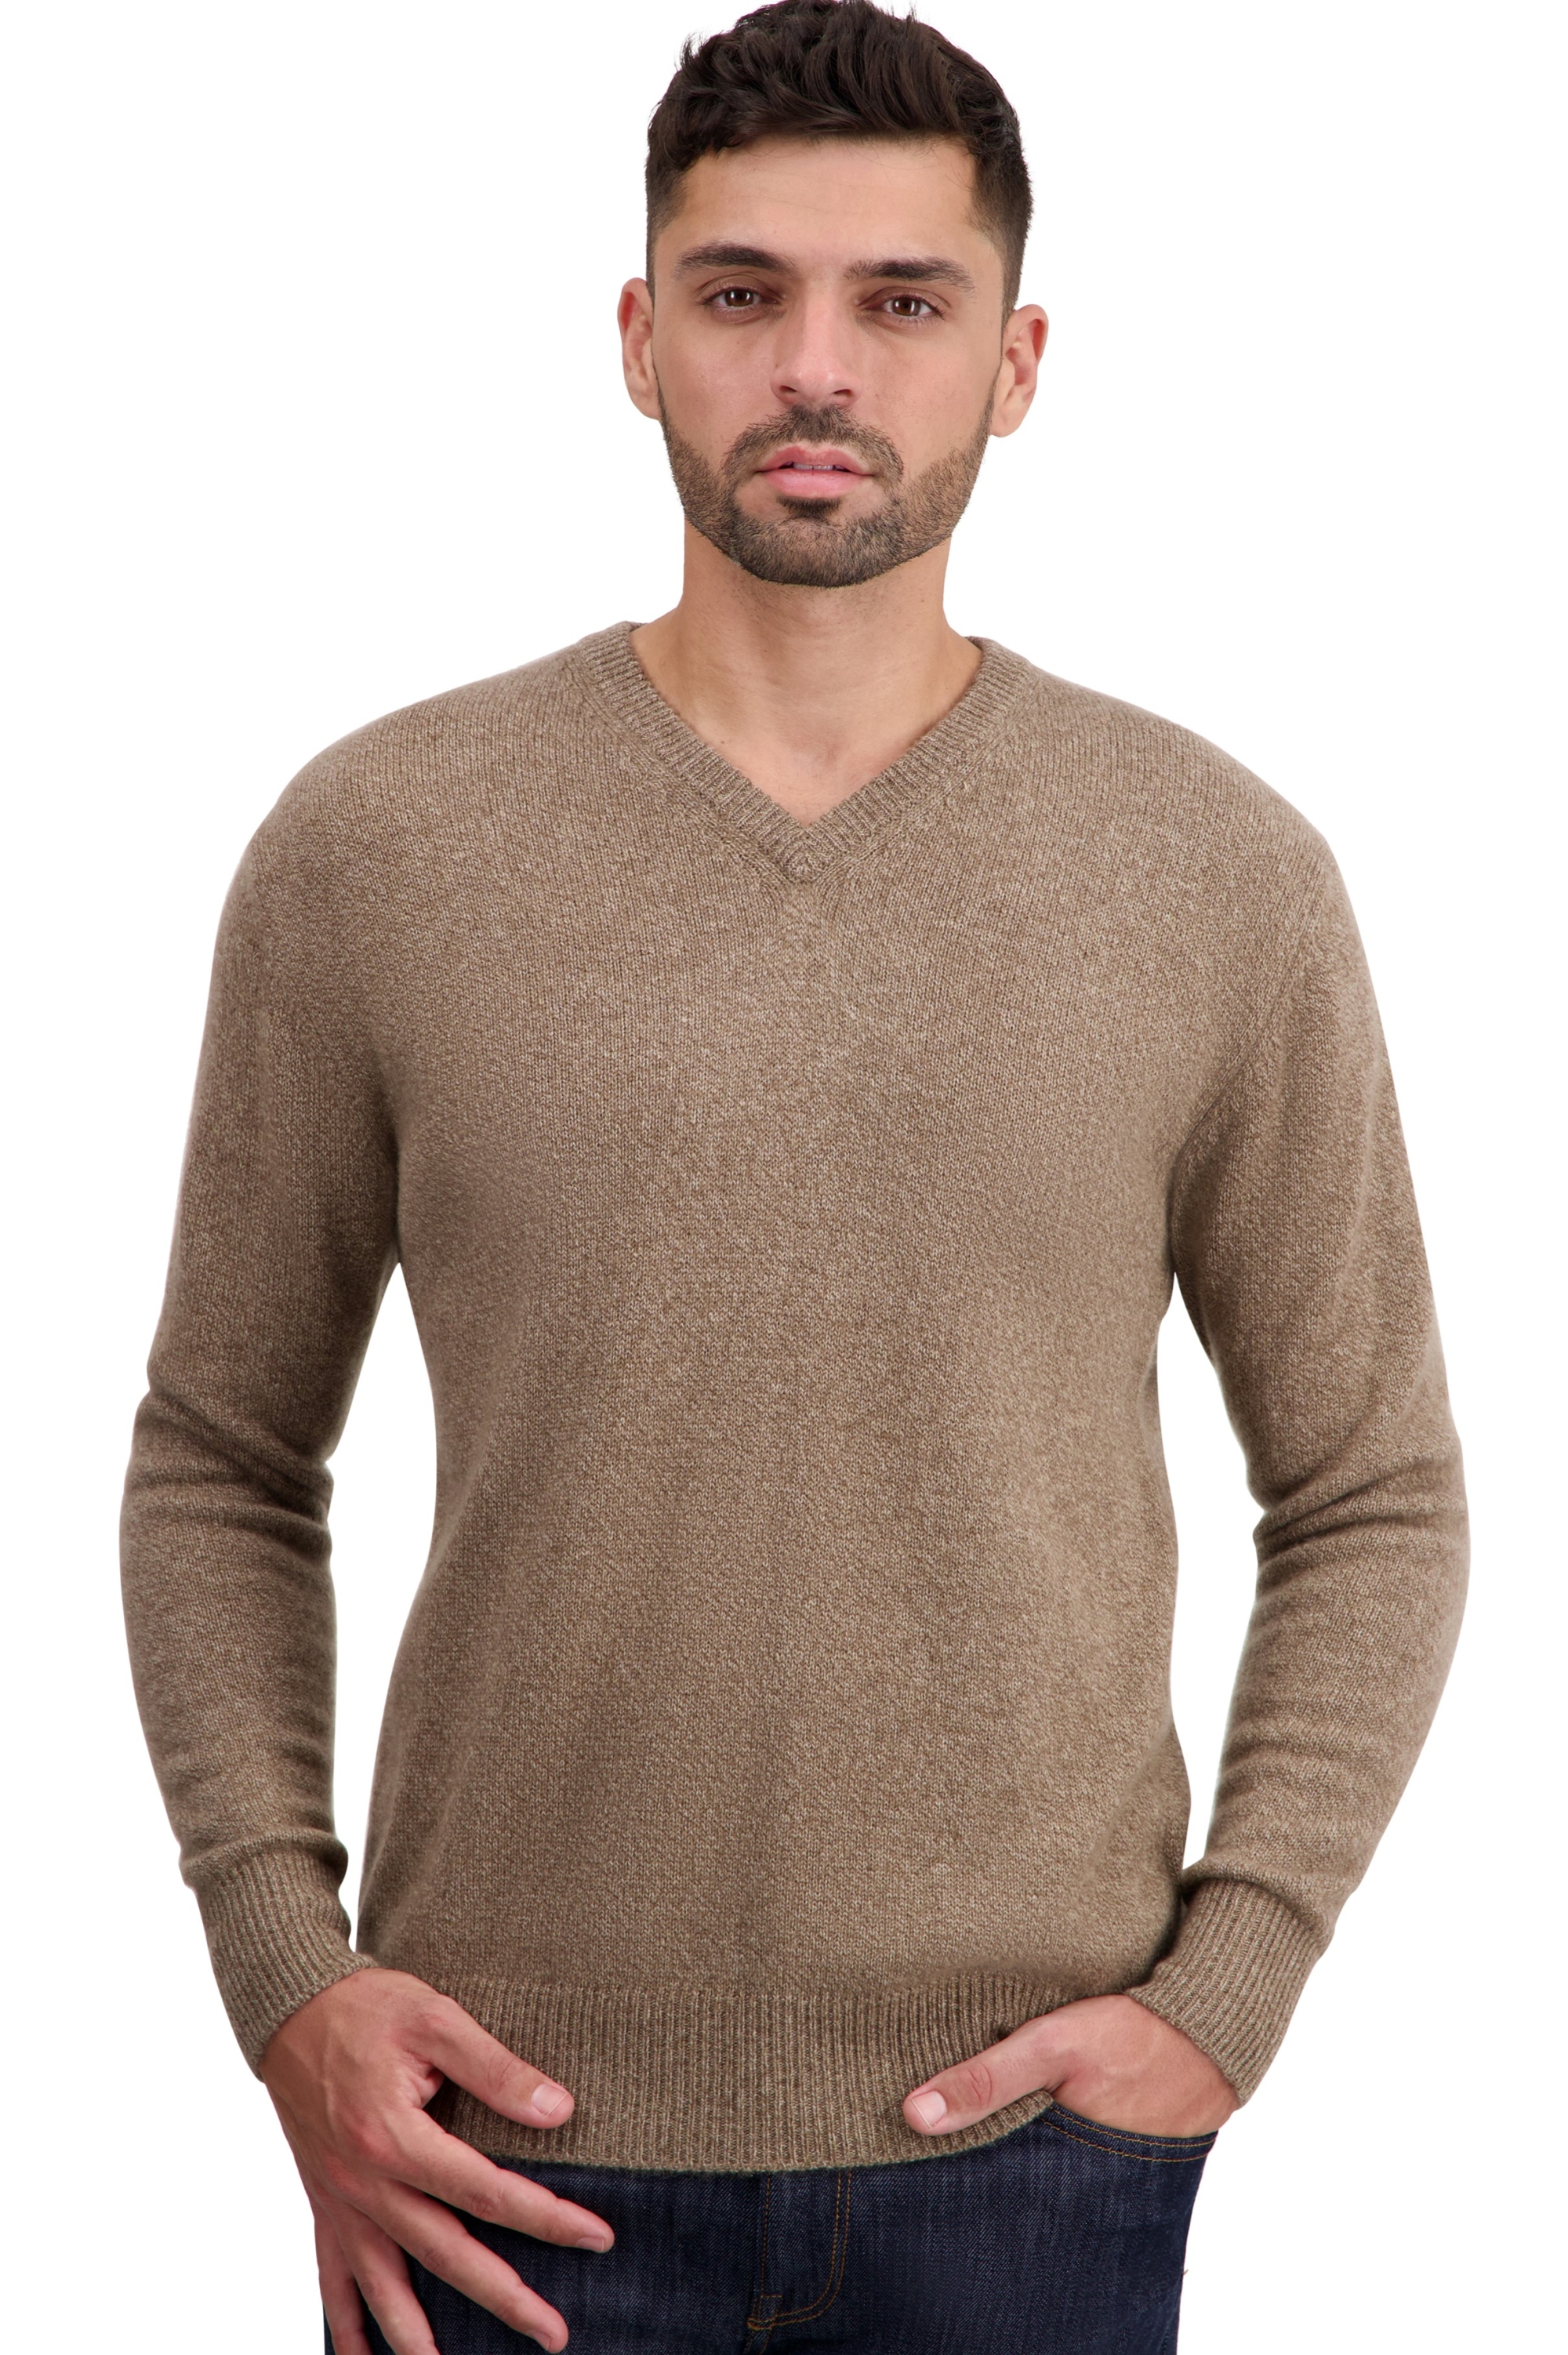 Cachemire pull homme tour first tan marl 3xl